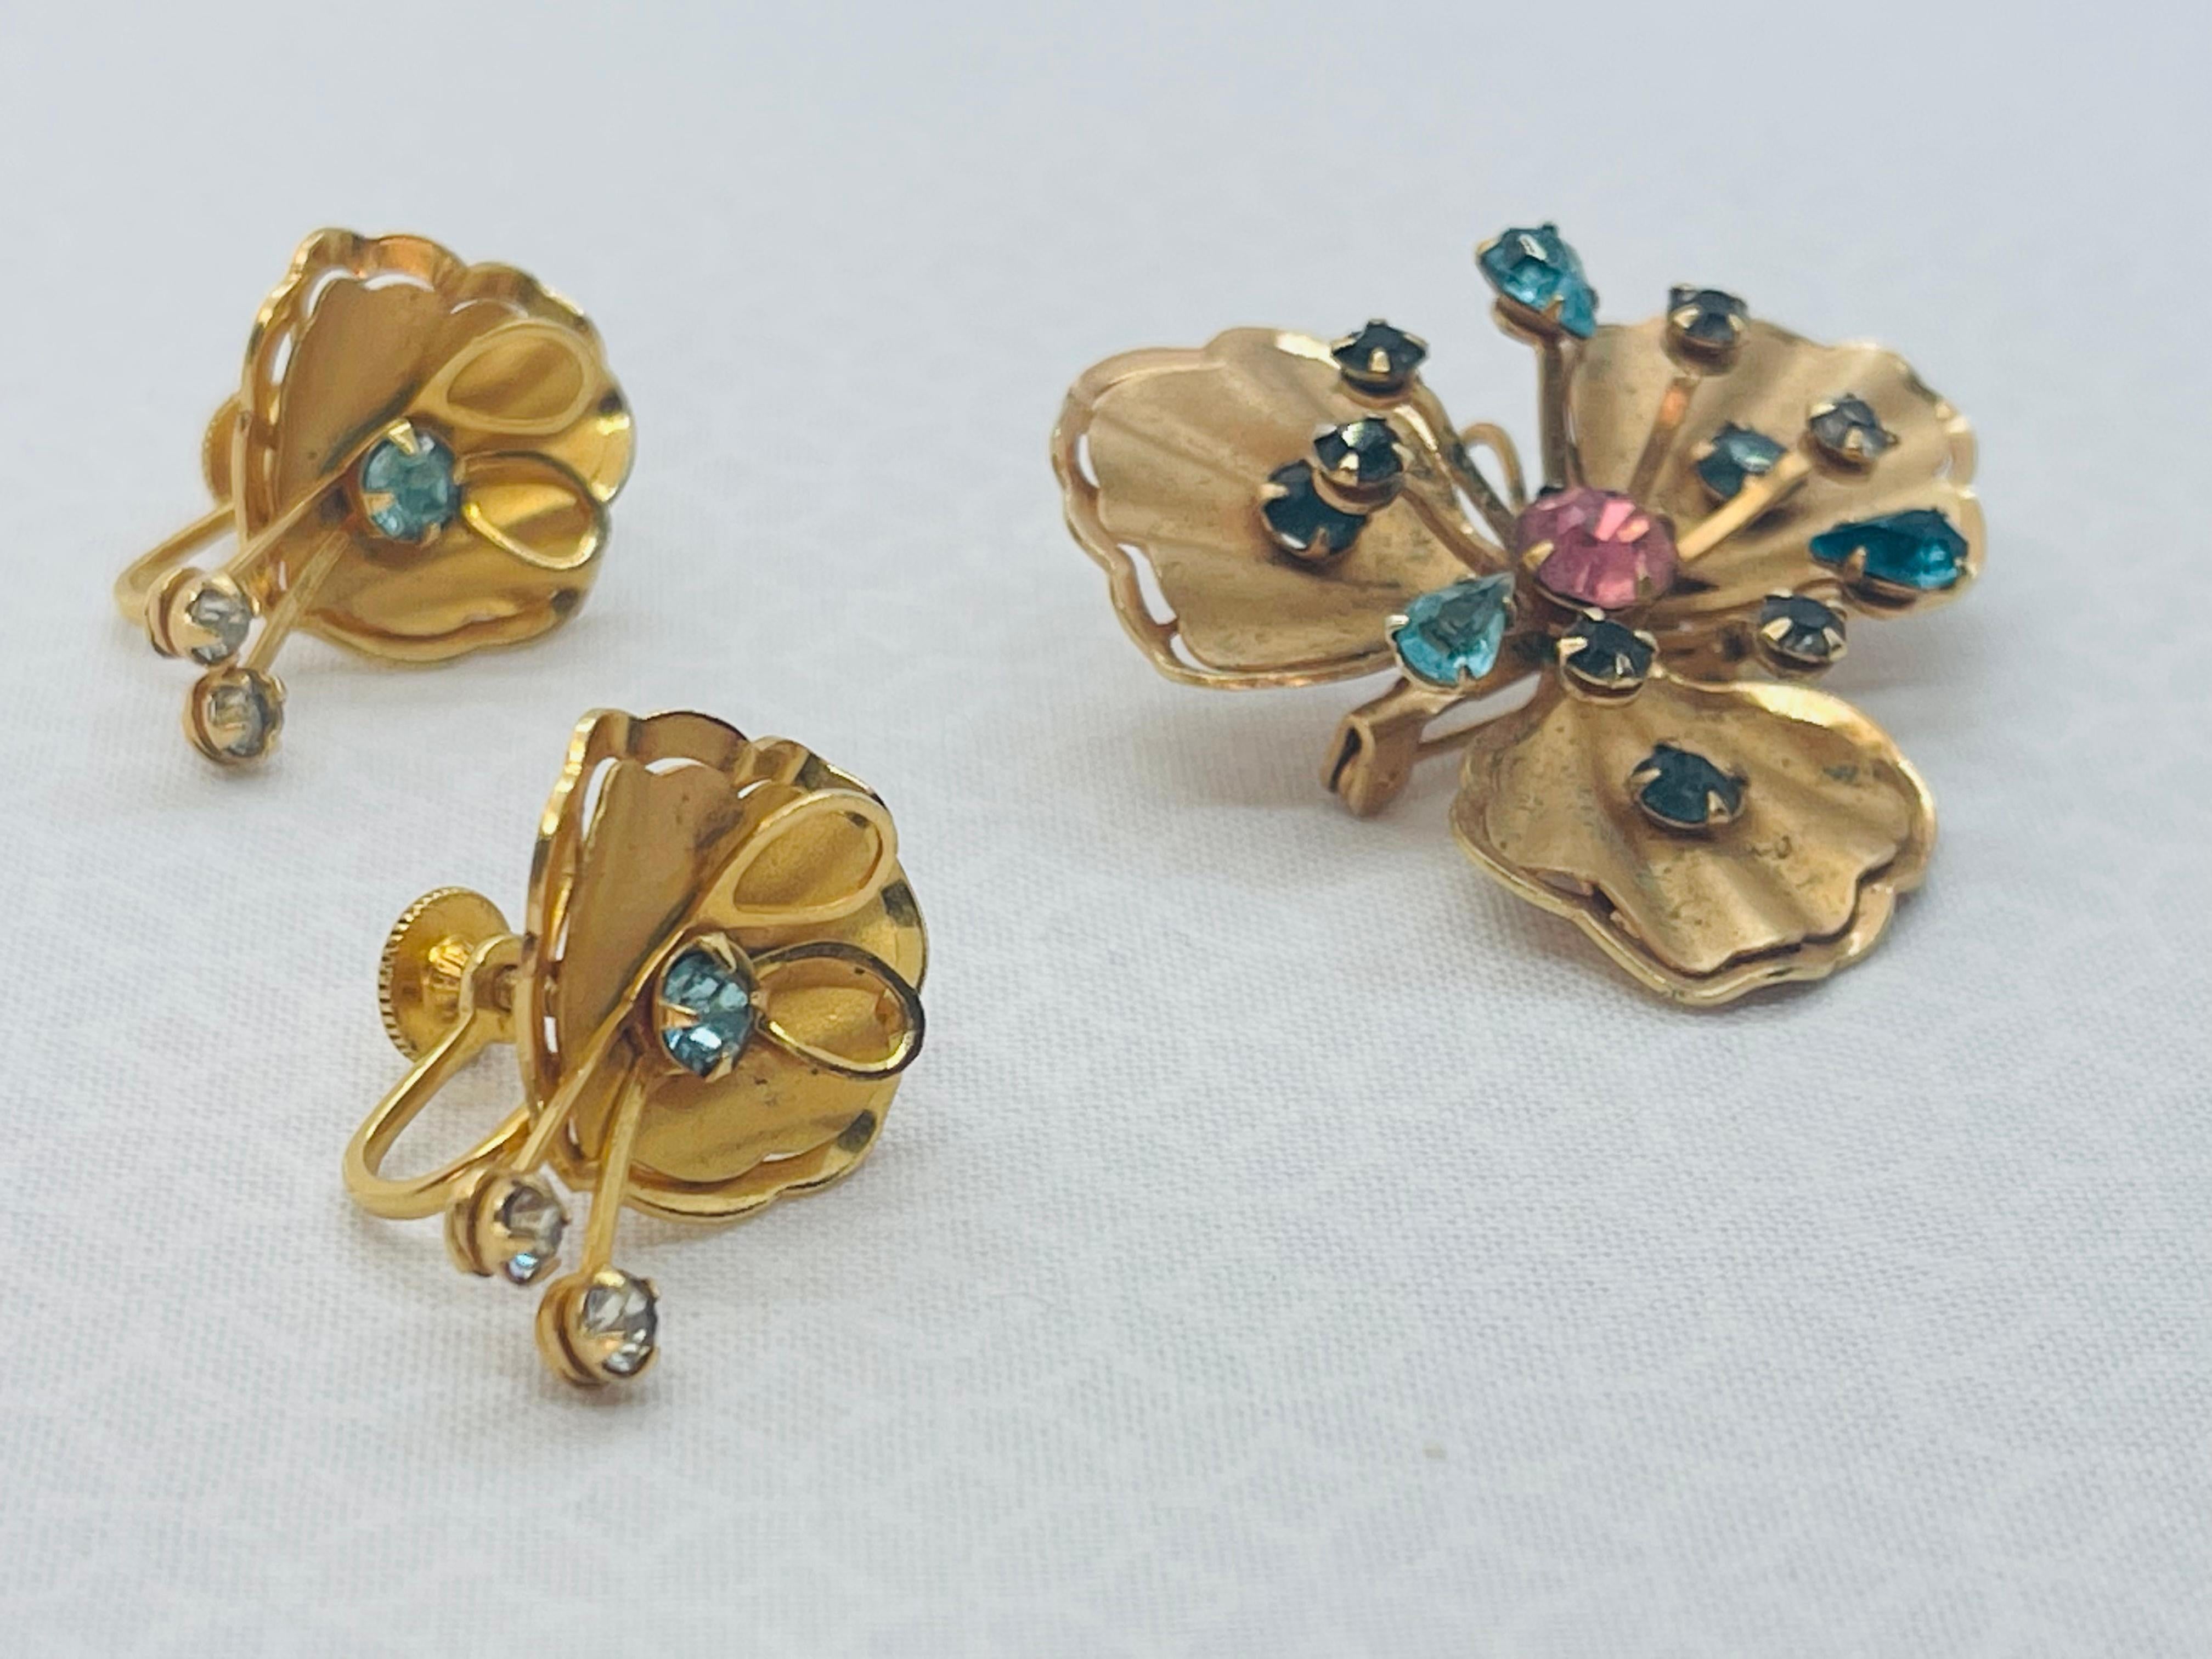 Bugbee & Niles Matching Earrings and Brooch Set Circa. 1955s - 1959 For Sale 6